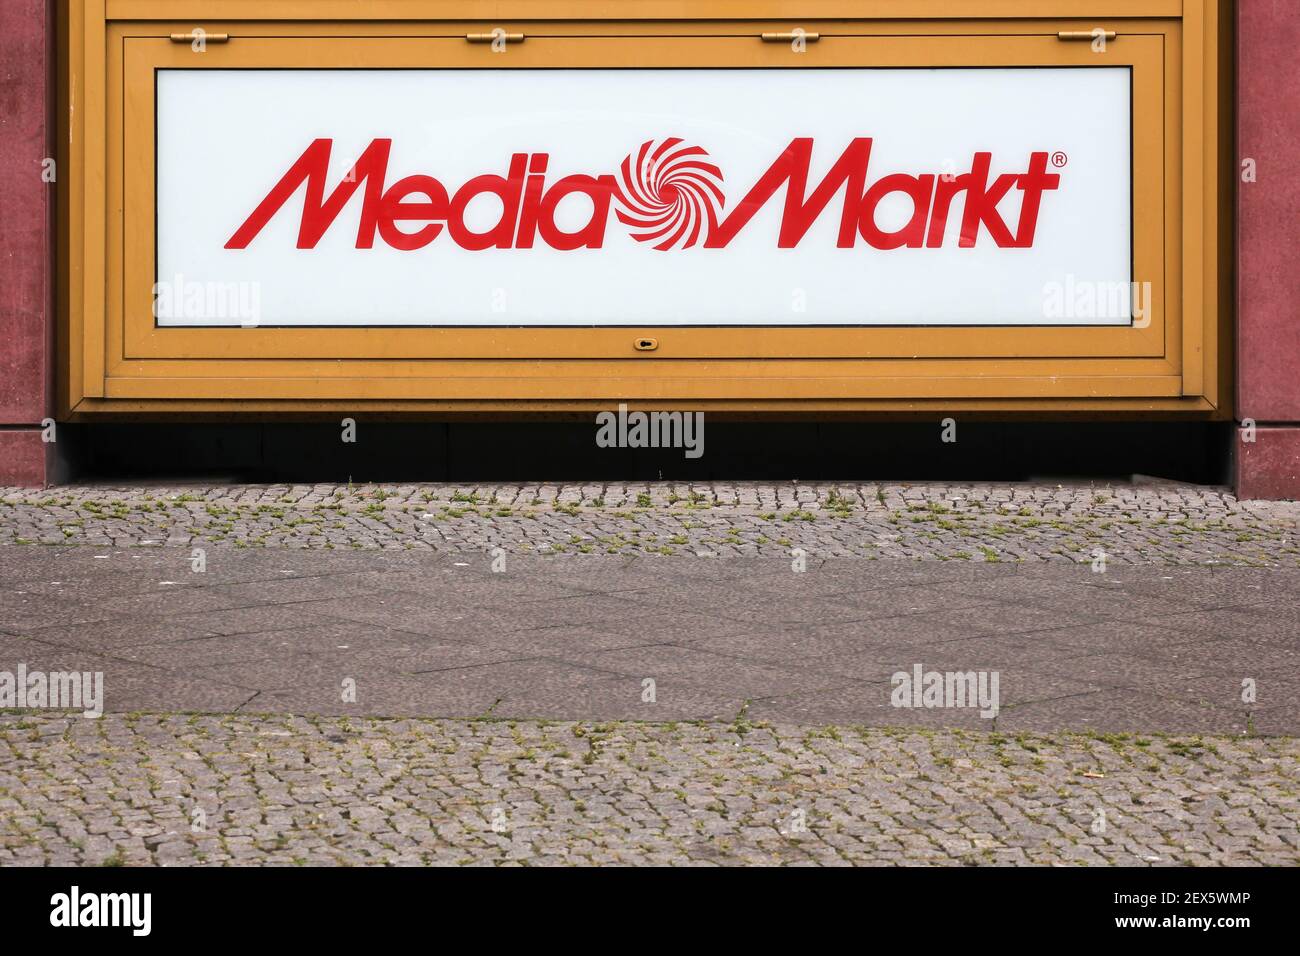 Berlin, Germany - July 12, 2020: Media Markt logo on a building. Media Markt is a German chain of stores selling consumer electronics Stock Photo